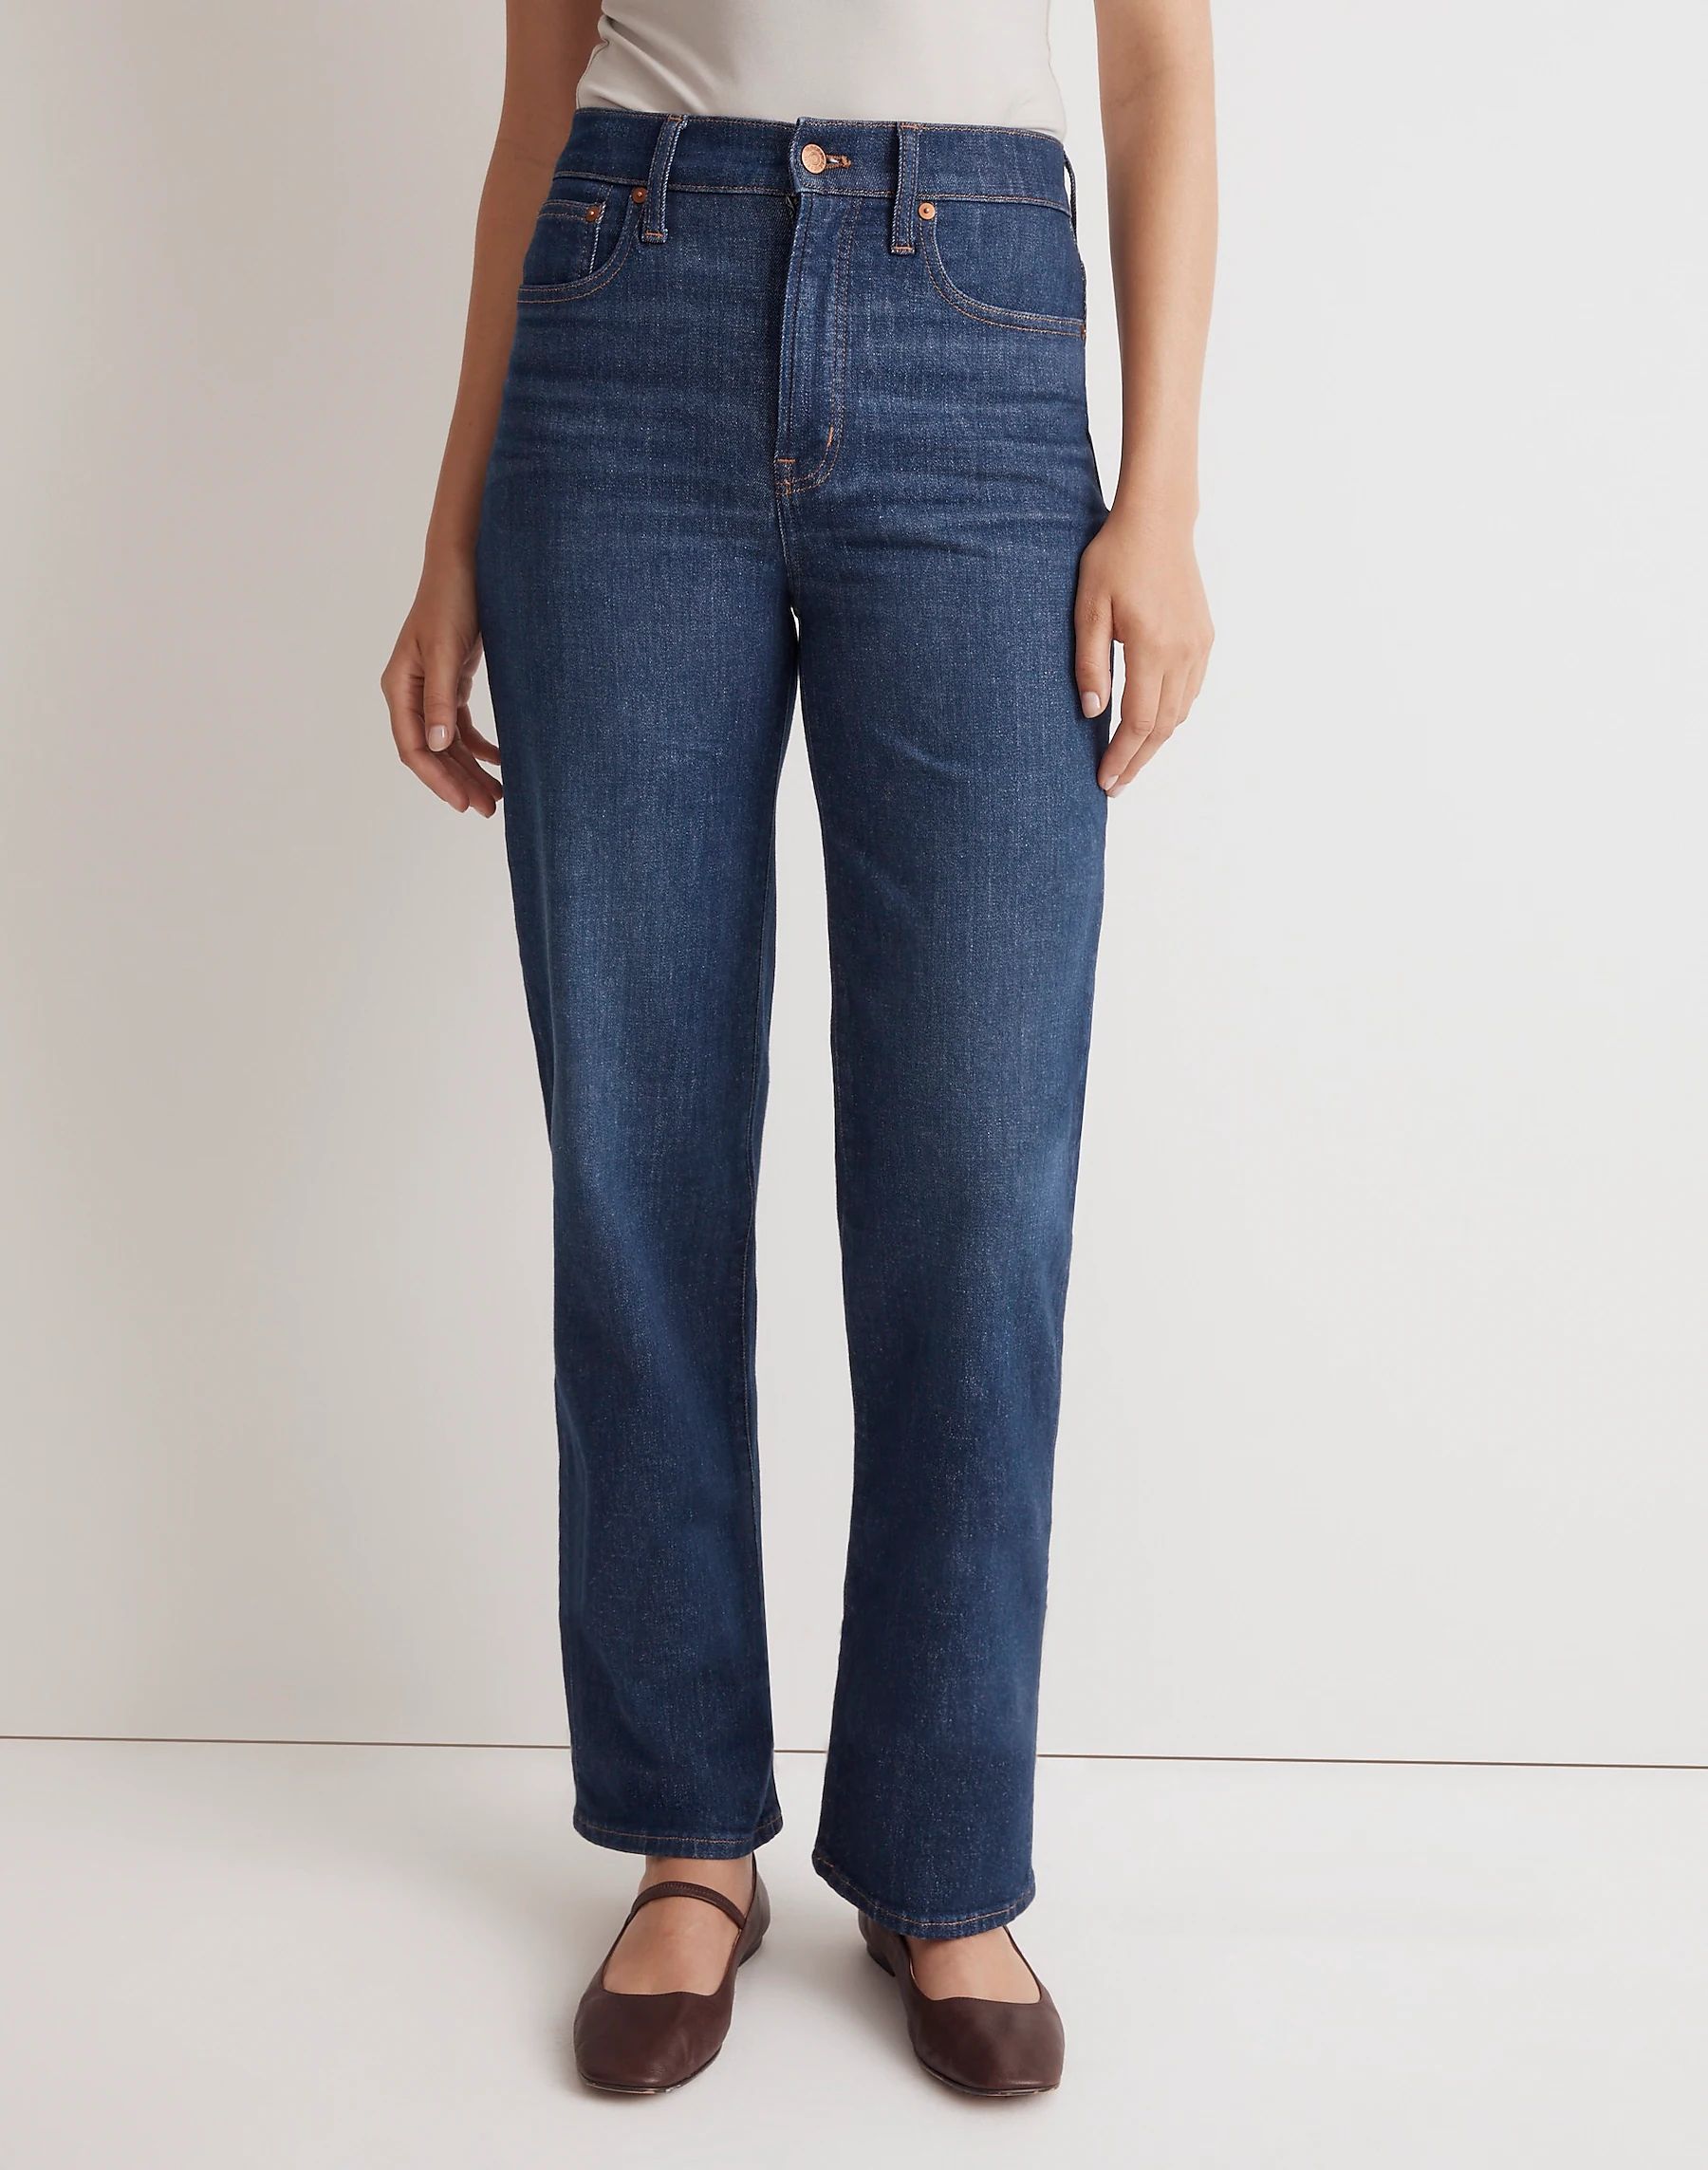 Finding Jeans with Short Inseams - A Petite Buying Guide – Search By Inseam